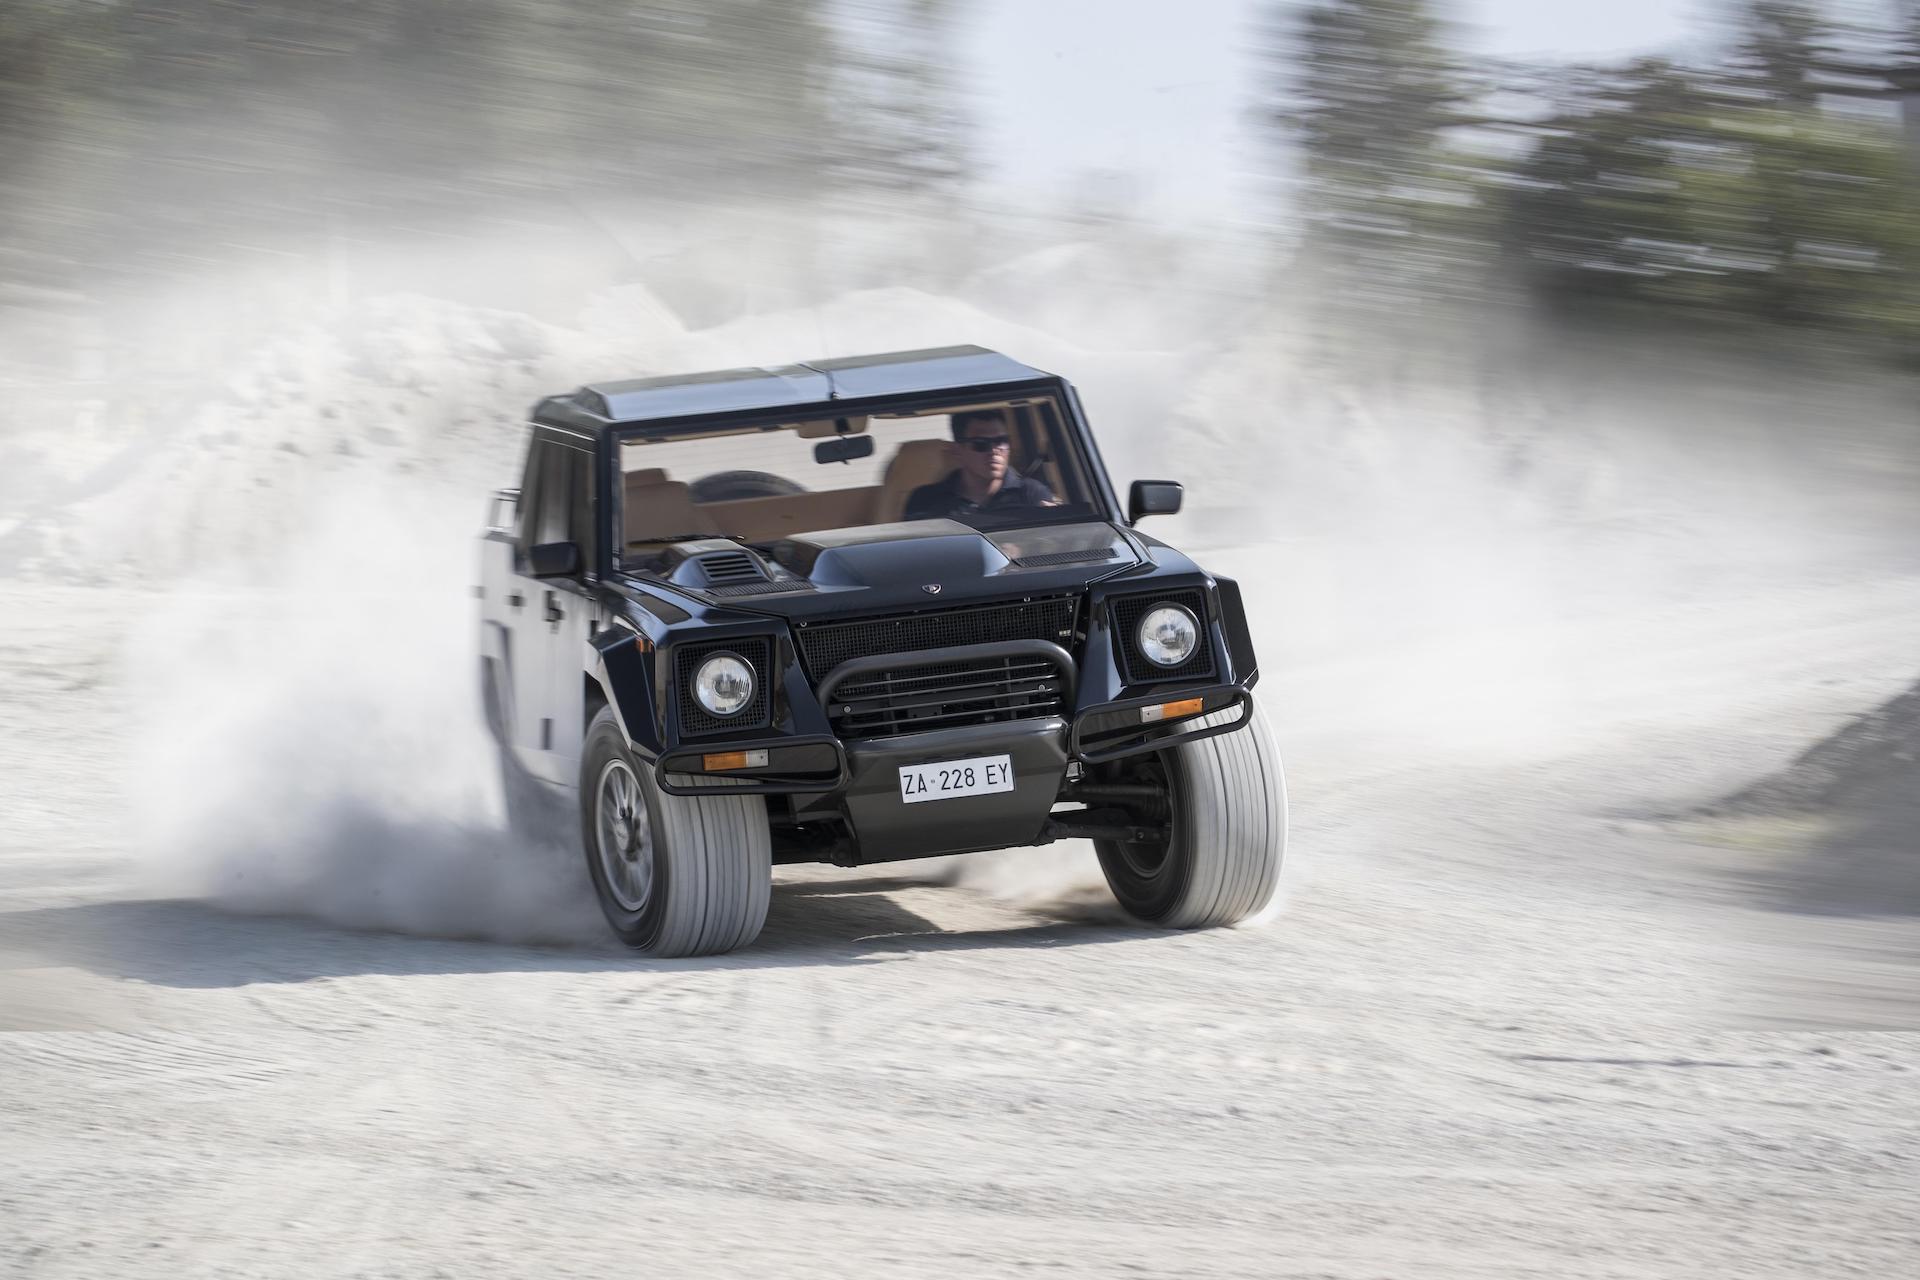 An image of a Lamborghini LM002 out on the road.